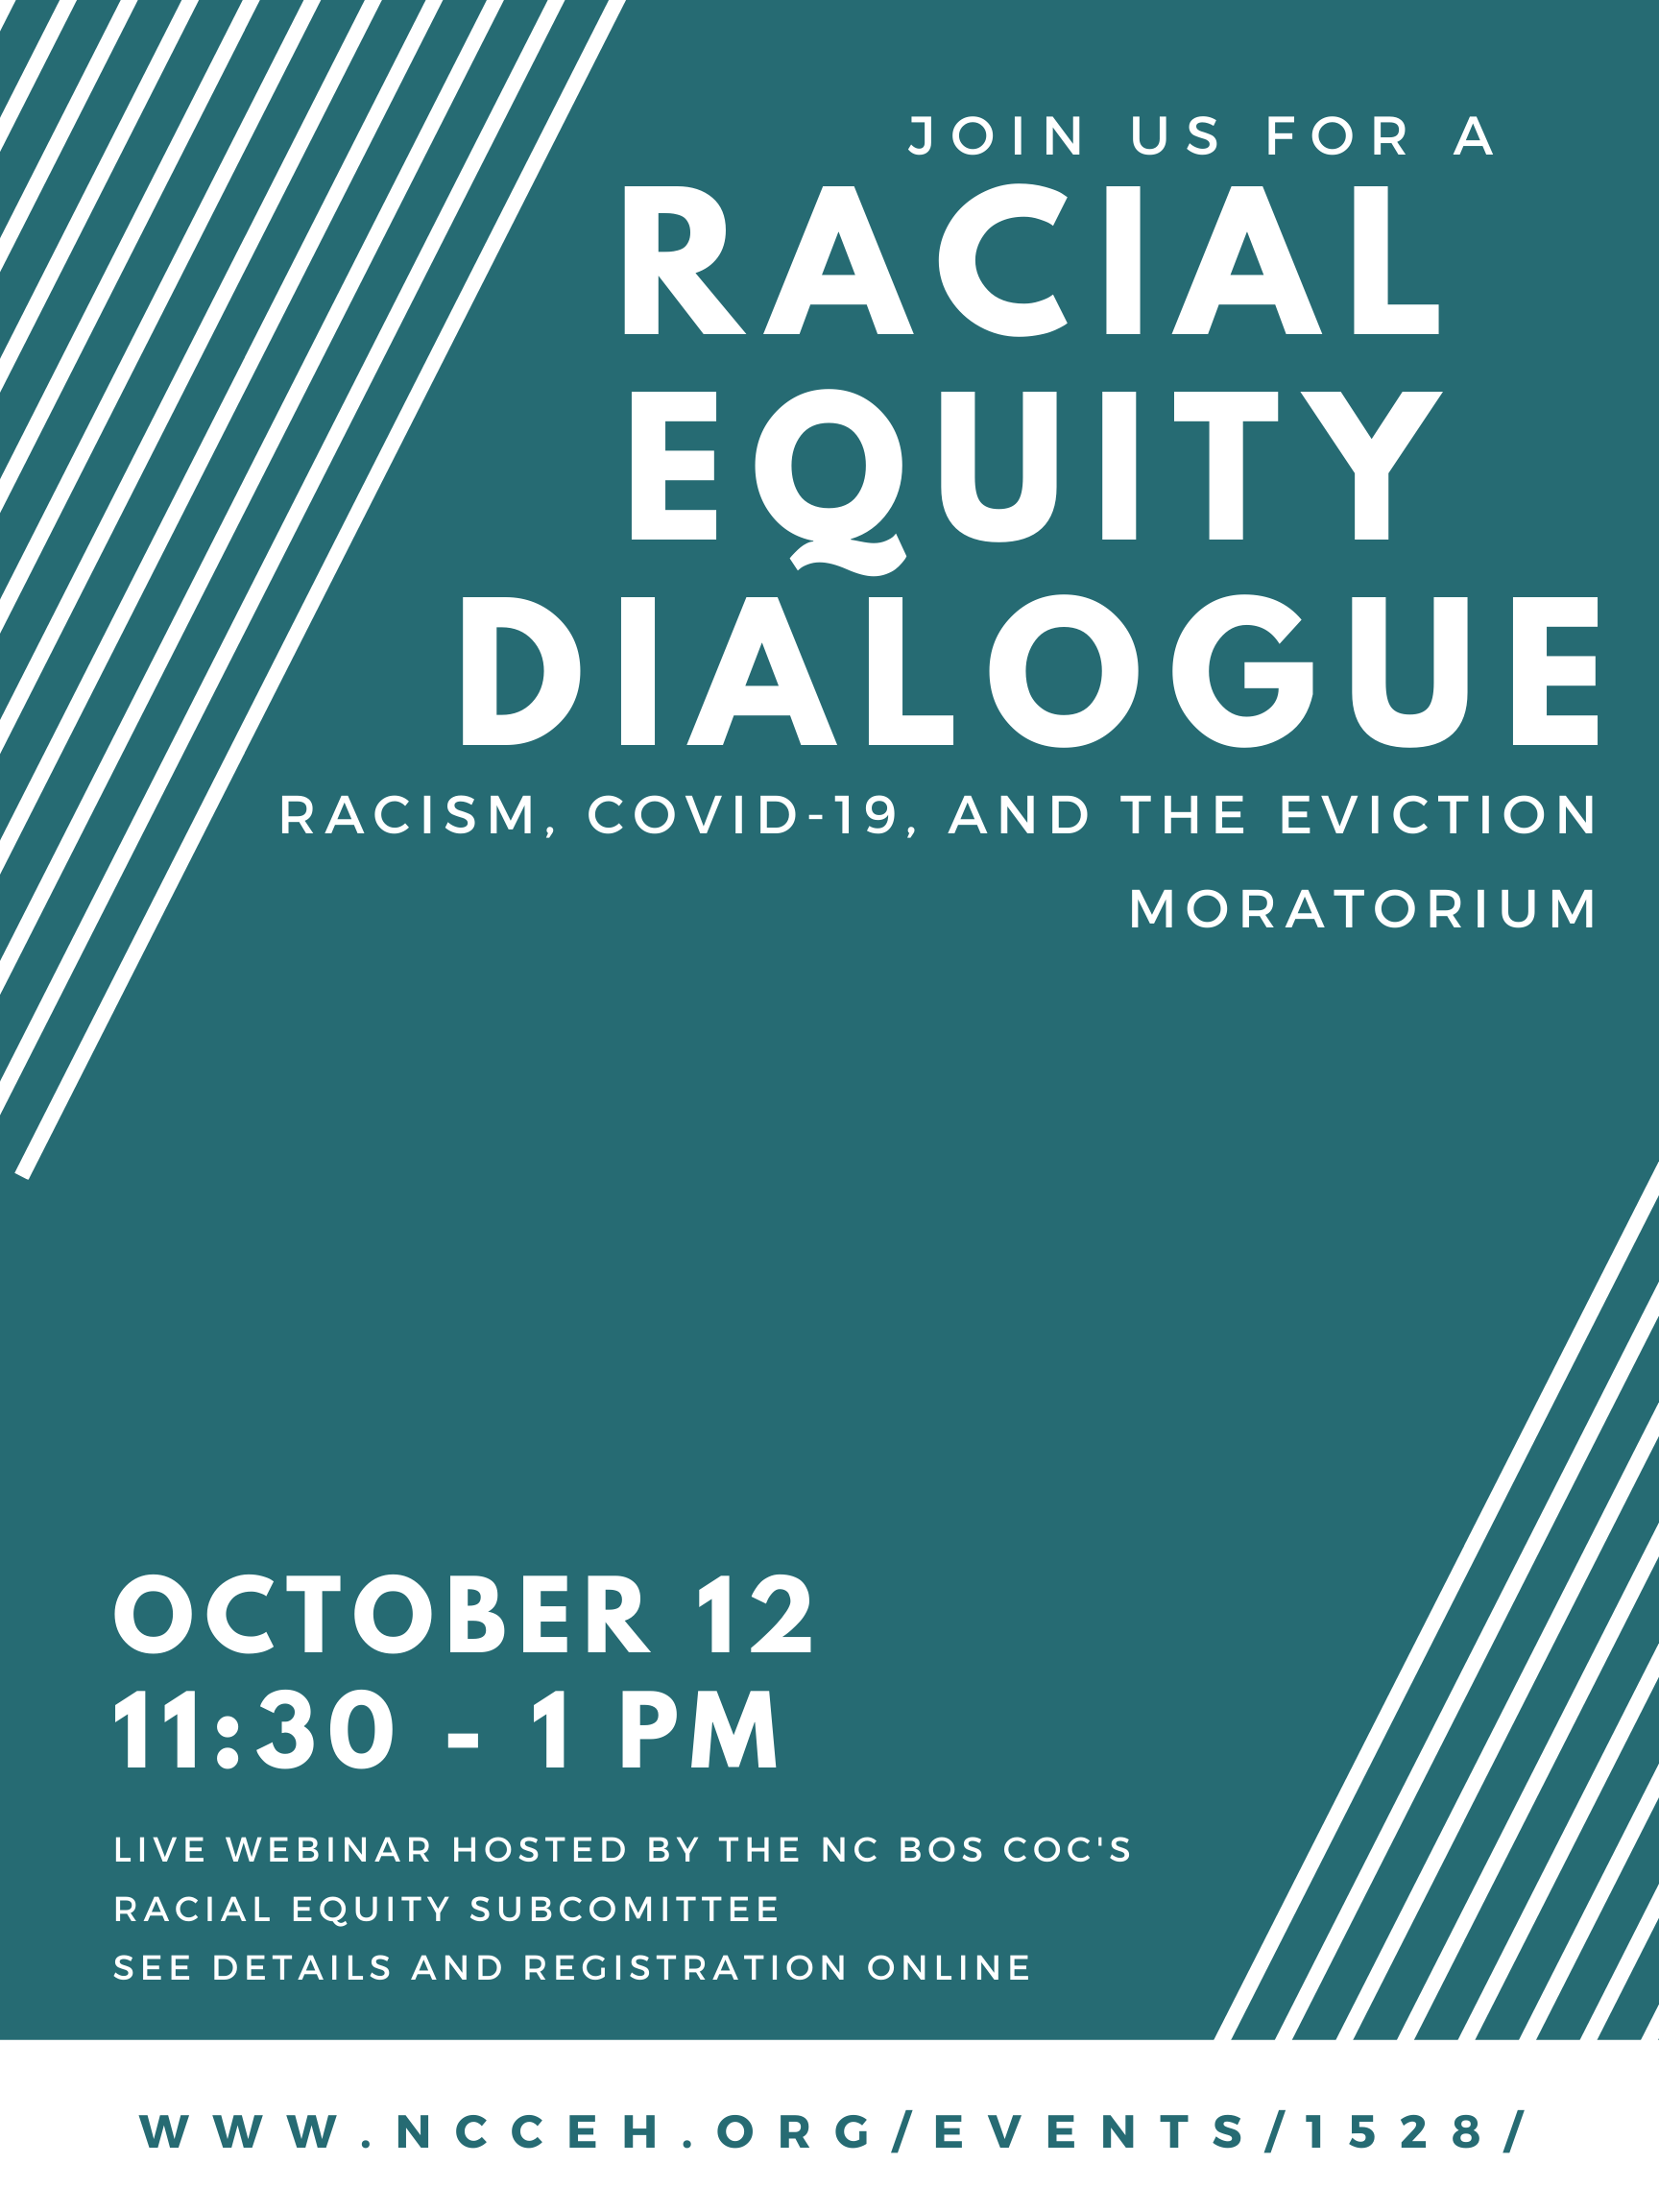 Racial Equity Dialogue Series - "Racism, COVID-19, and the Eviction Moratorium"